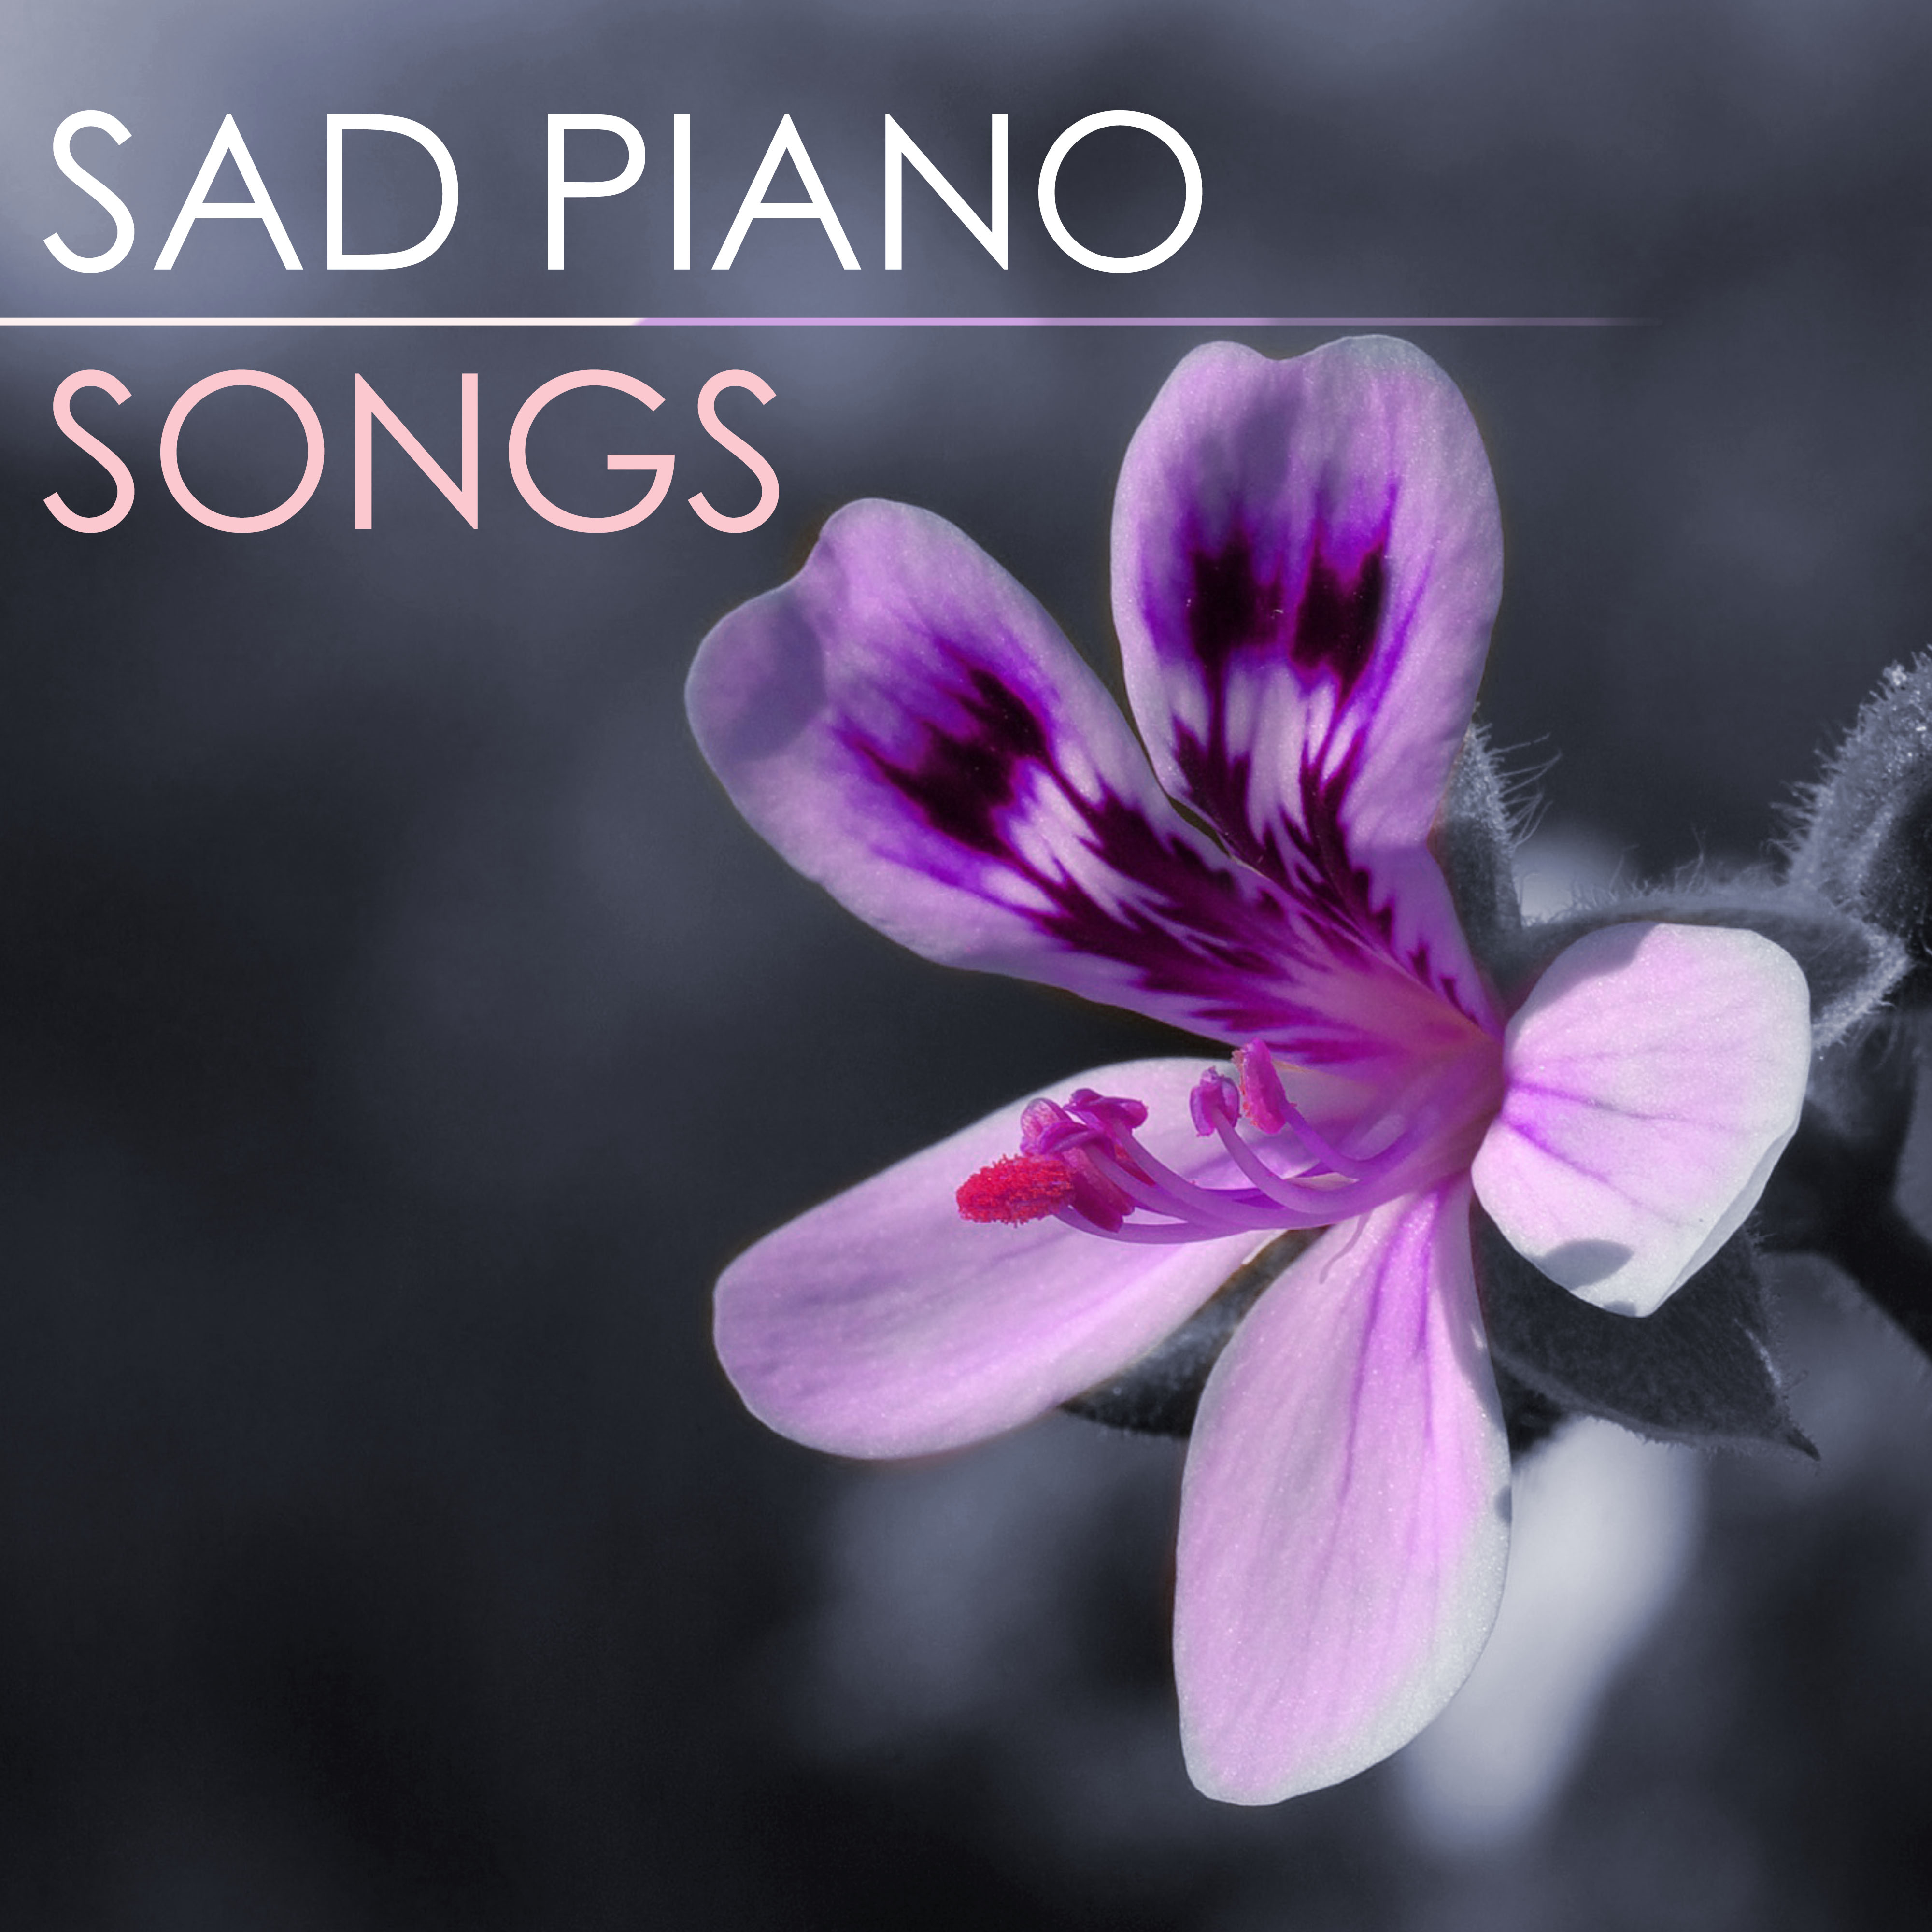 Sad Piano - Melancholy Instrumental Songs and Emotional Background Pianobar Night Moods for Broken Heart